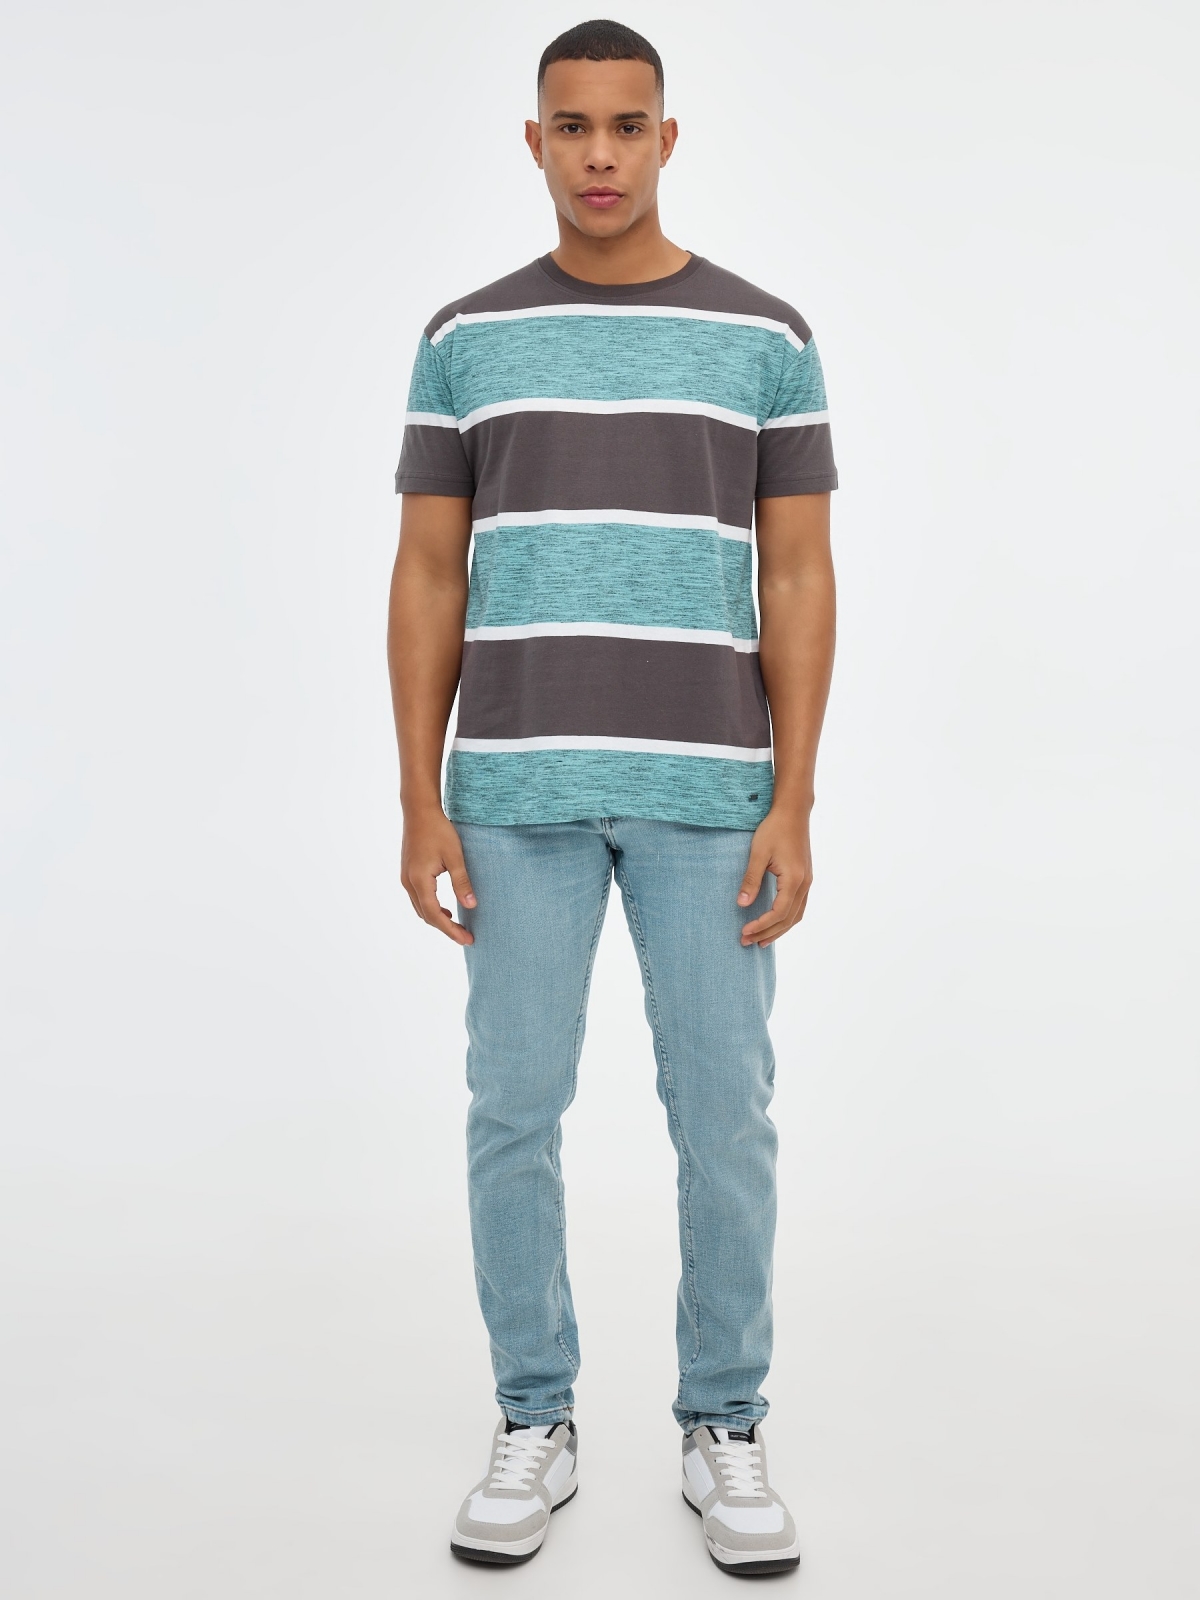 Bicolor striped T-shirt green front view